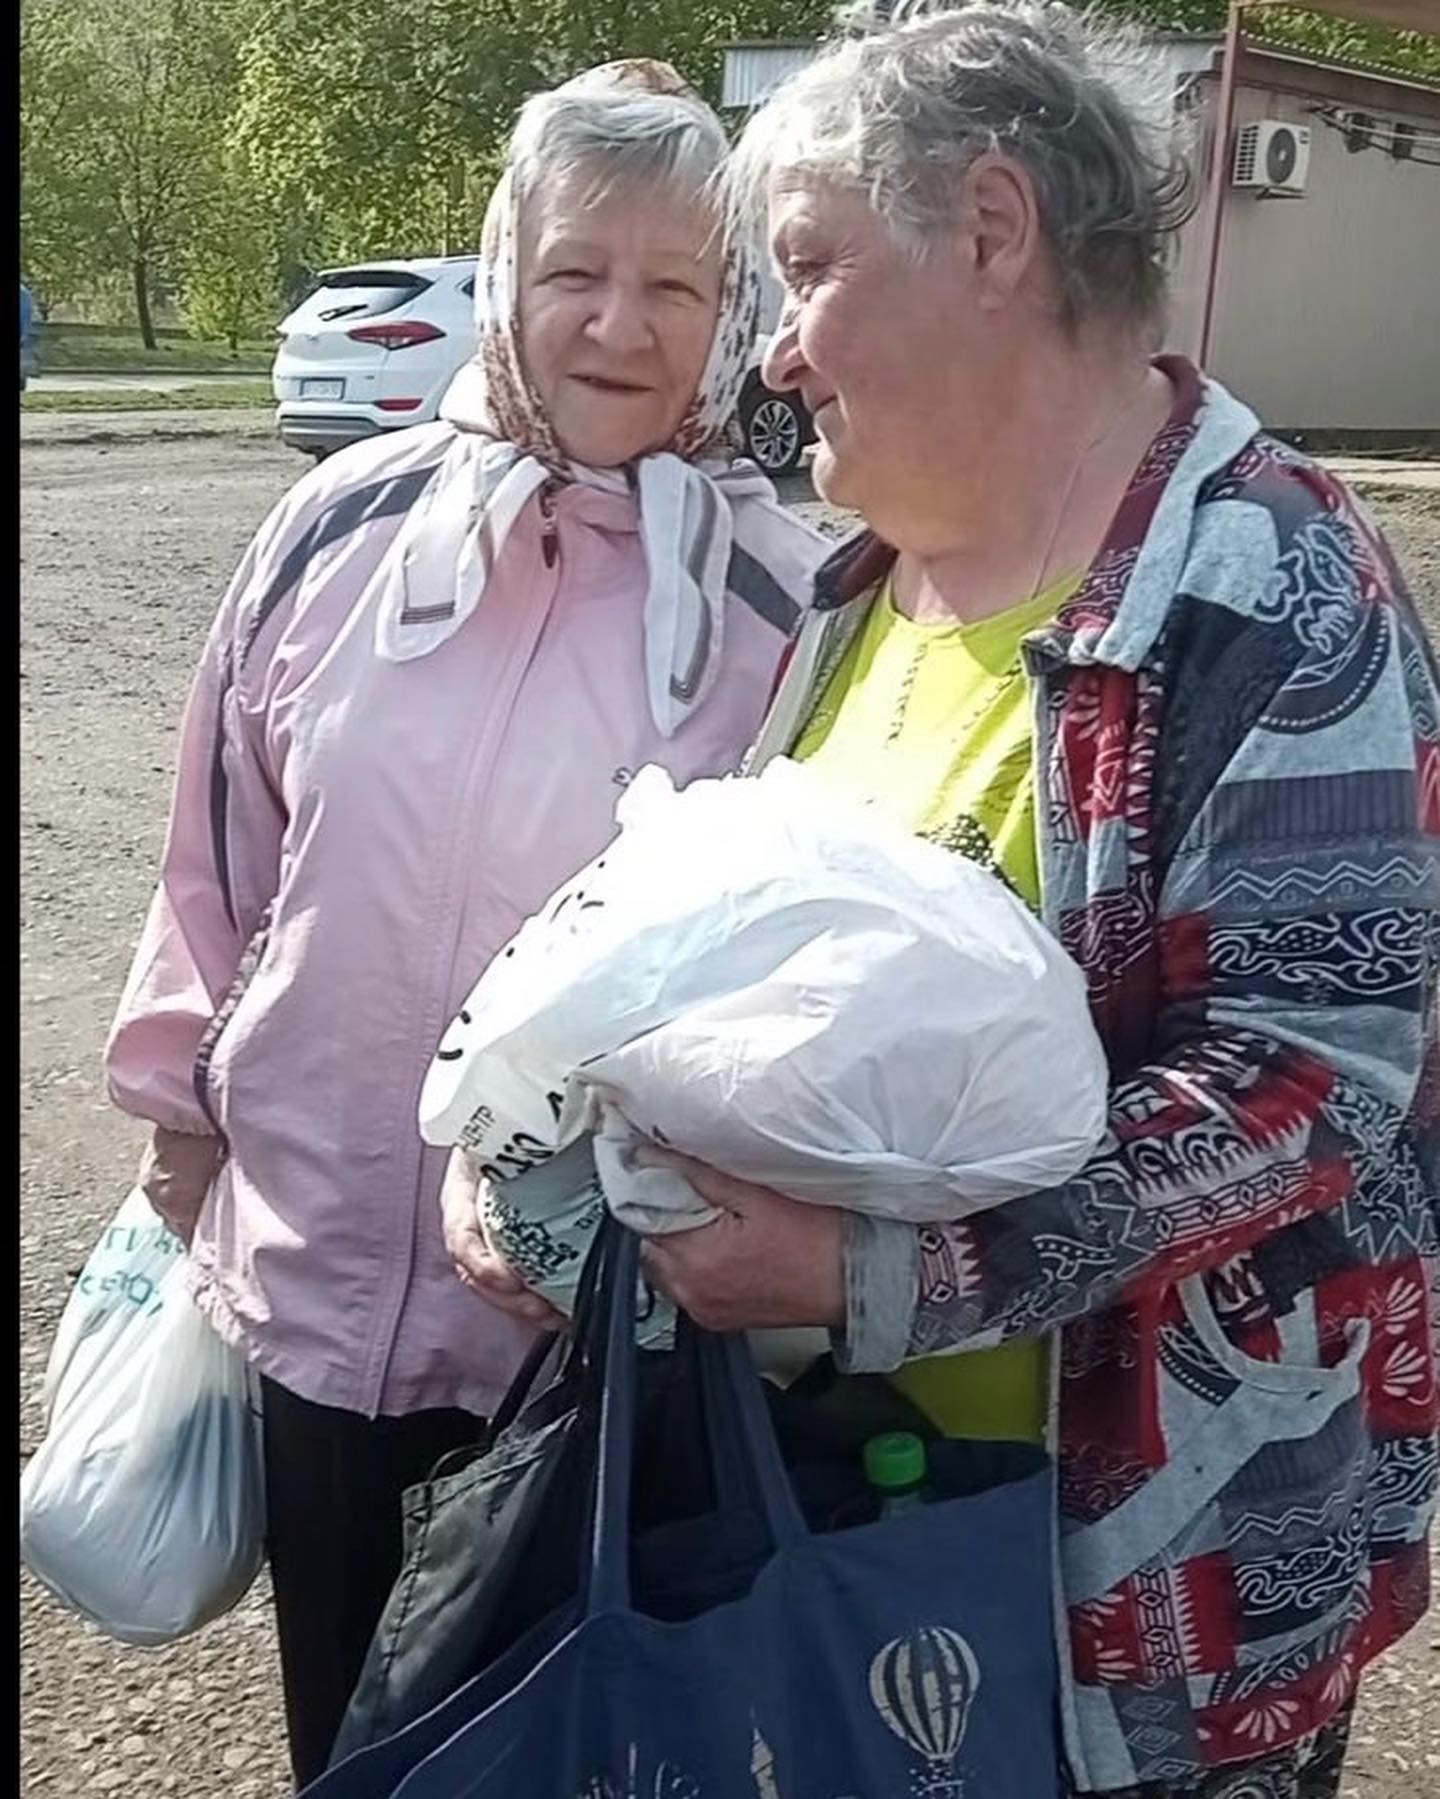 Two elderly women chatting outdoors, one holding plastic bags with supplies for Ukraine aid, surrounded by cars and greenery.